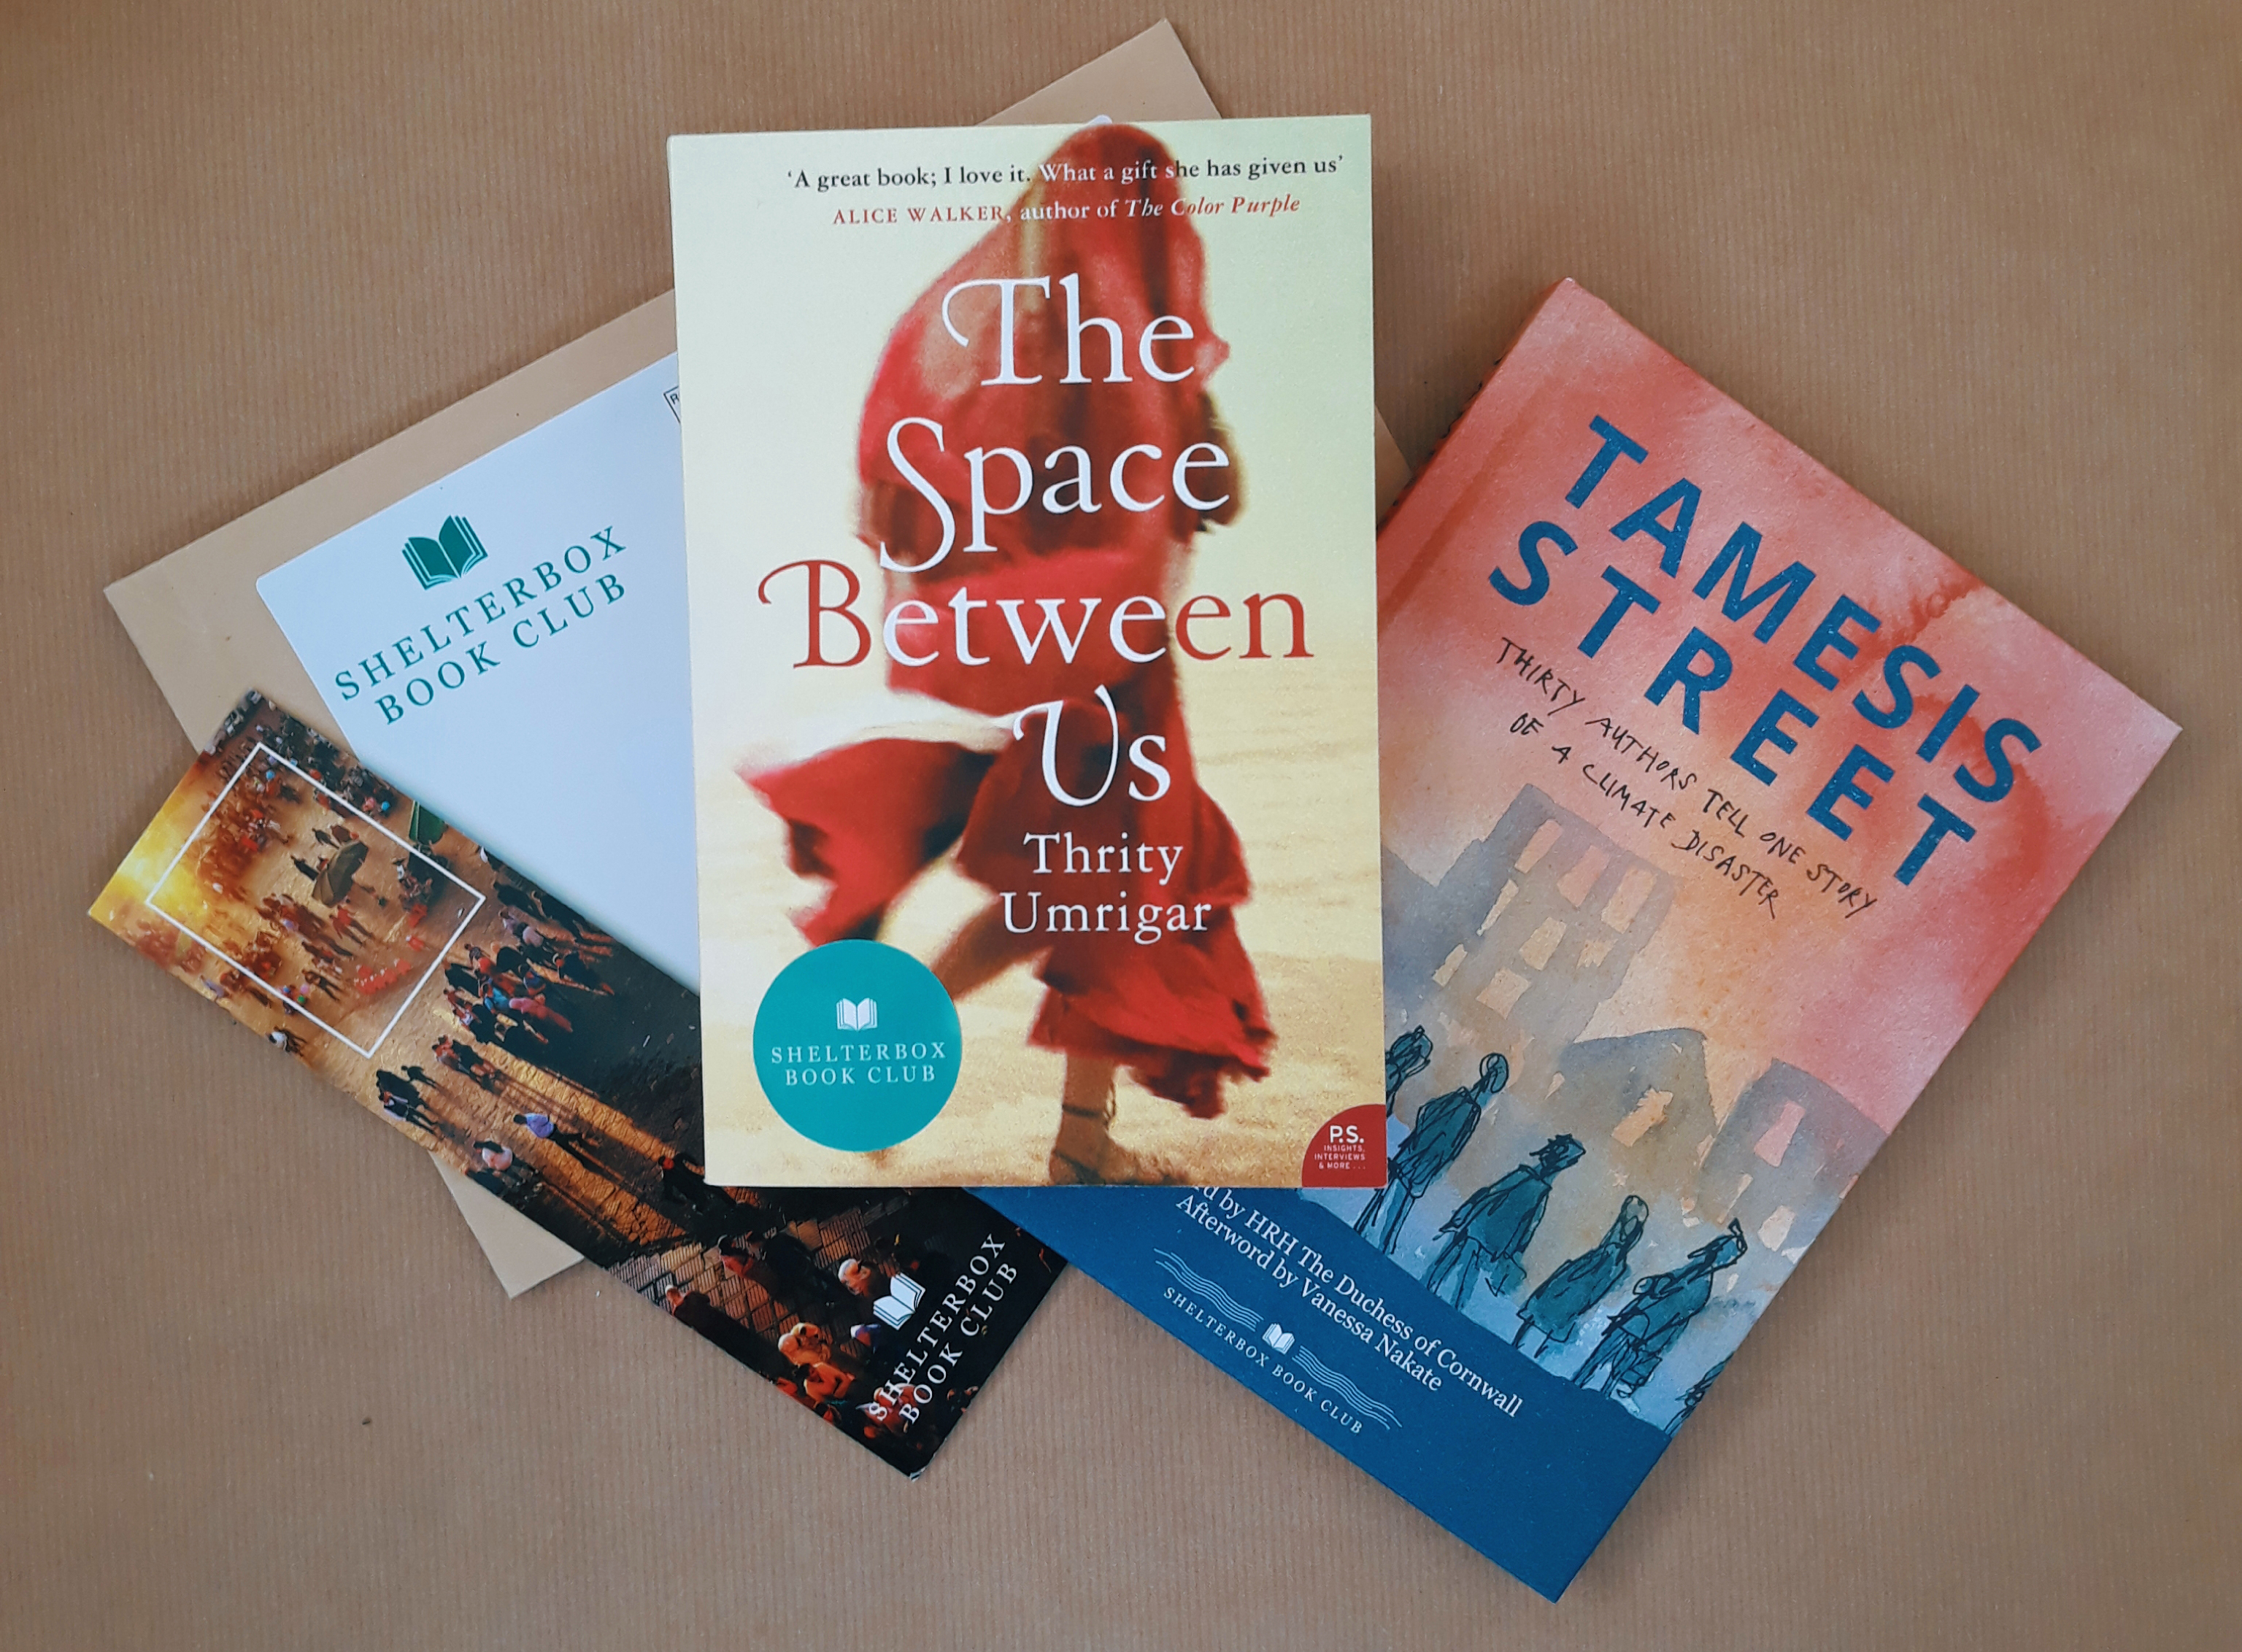 A selection of books from ShelterBox Book Club, with a book mark and envelope